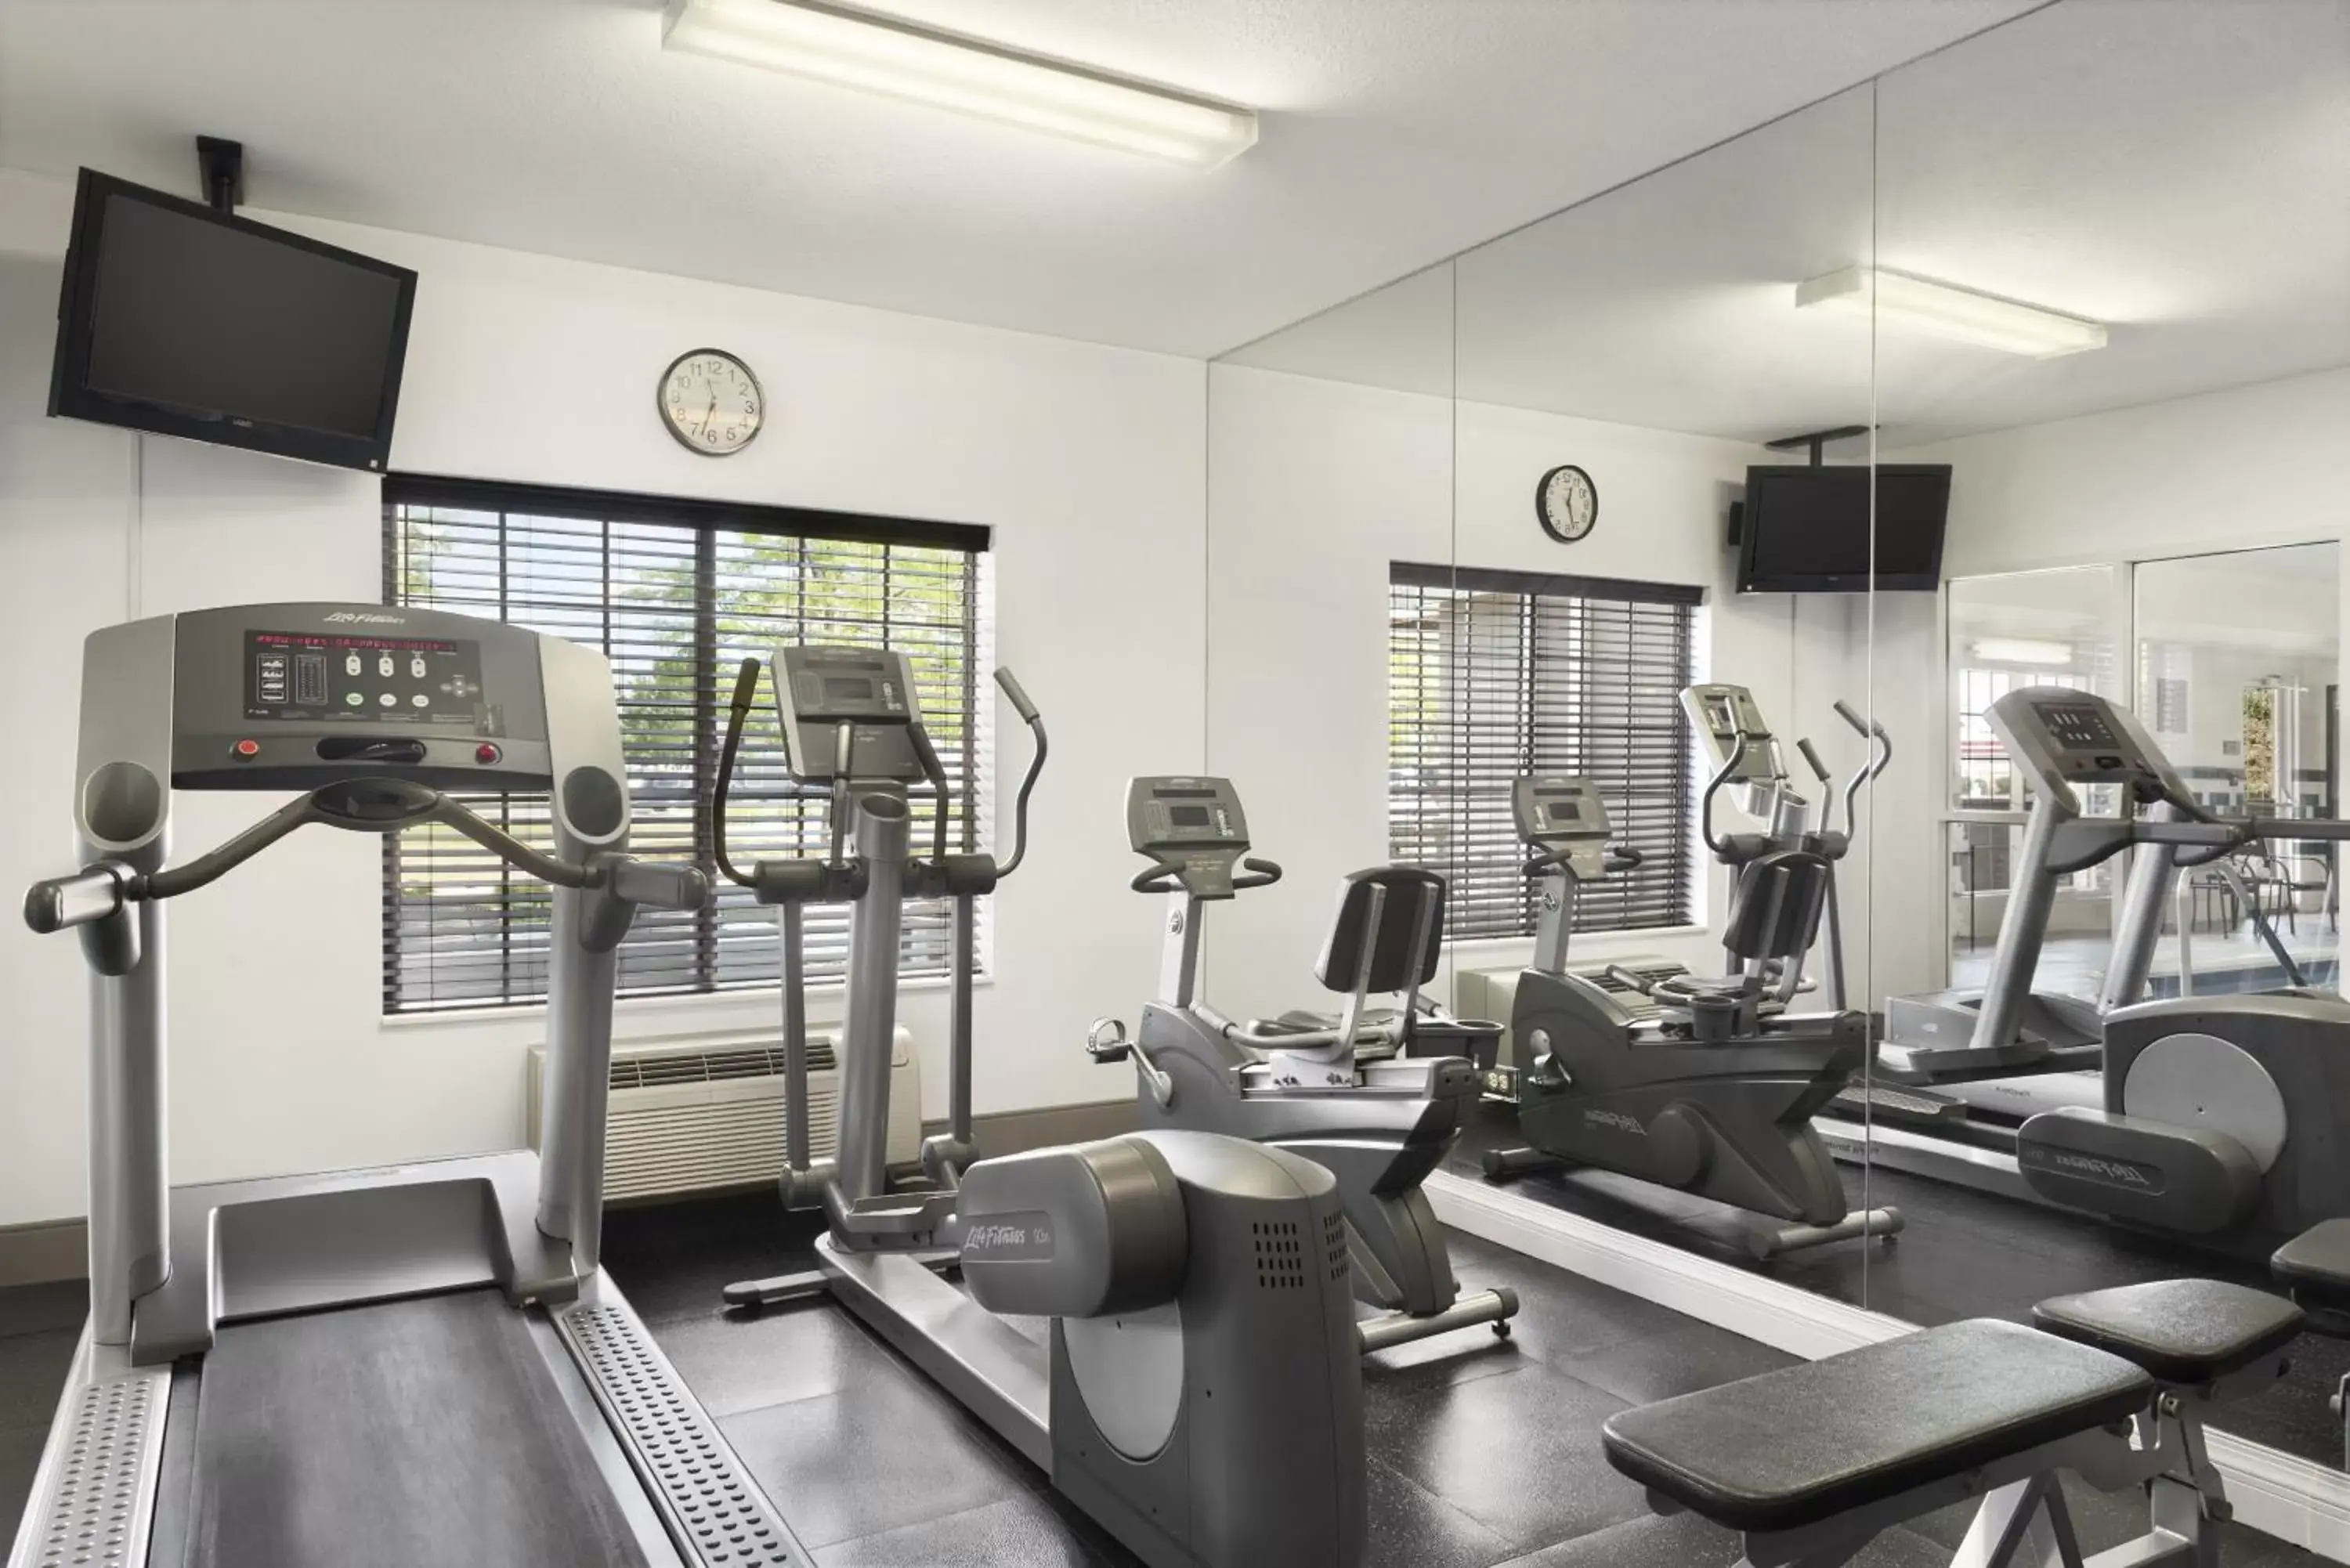 Fitness centre/facilities, Fitness Center/Facilities in Country Inn & Suites by Radisson, Romeoville, IL